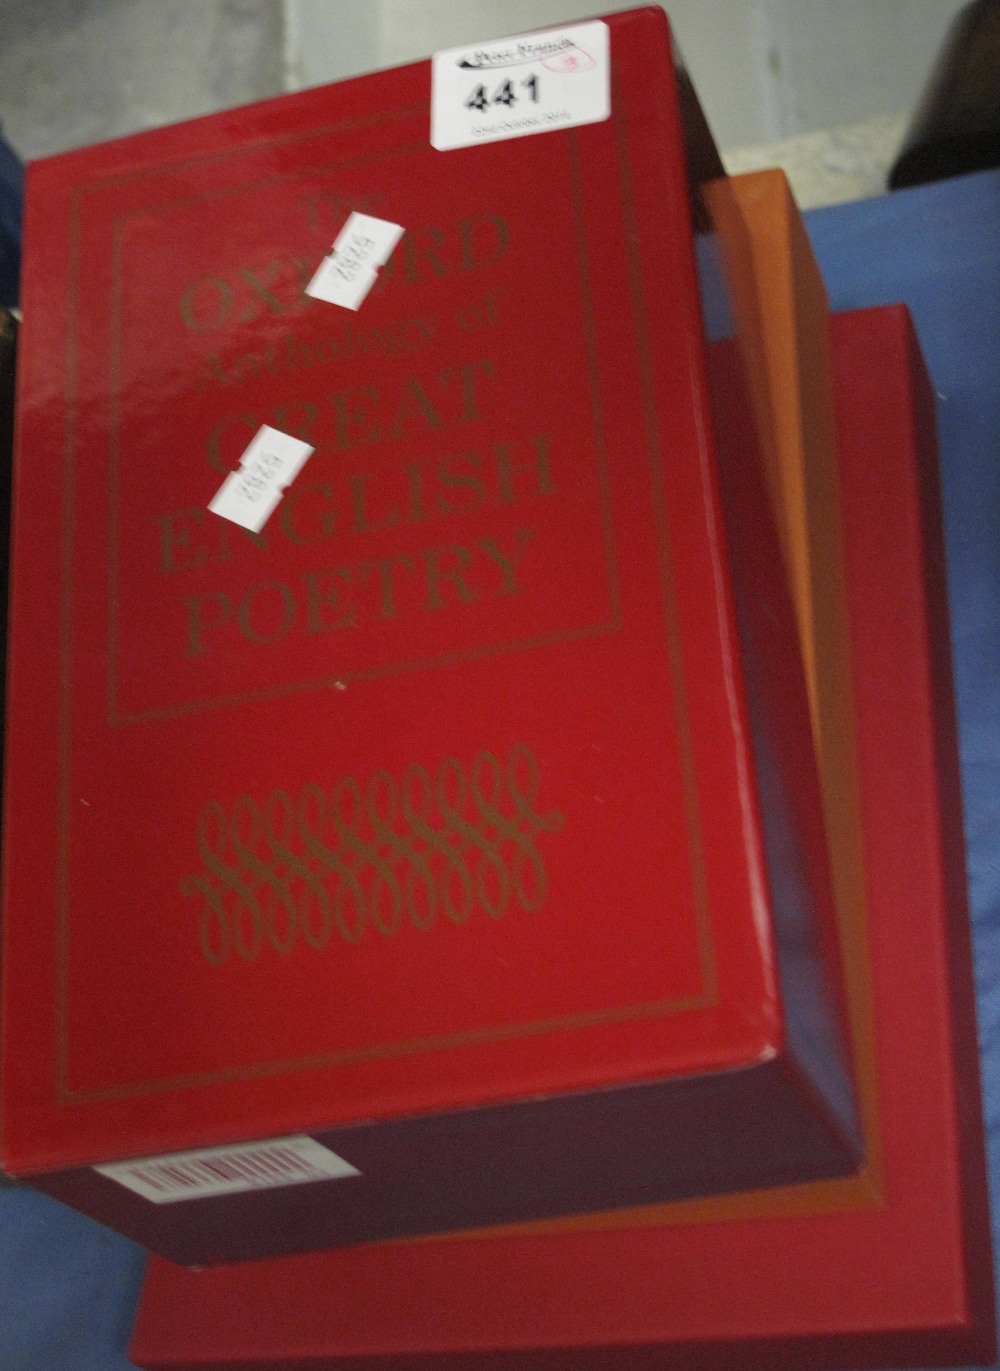 Two volumes "The Oxford Anthology of Great English Poetry" modern, "Modern Greek Myths" by Rovert